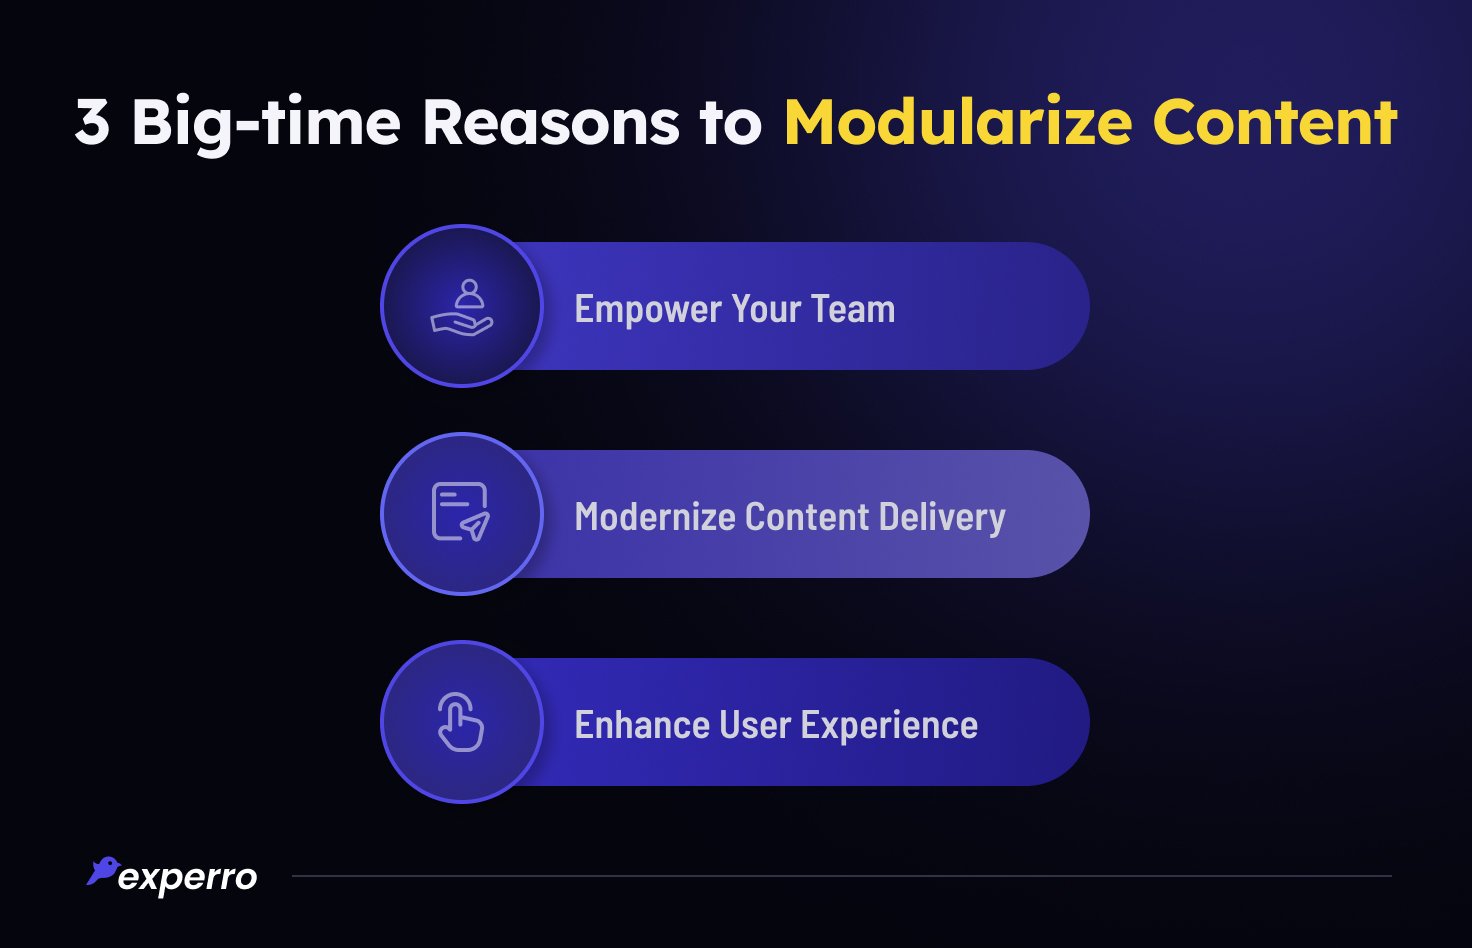 Why Should You Modularize Content?